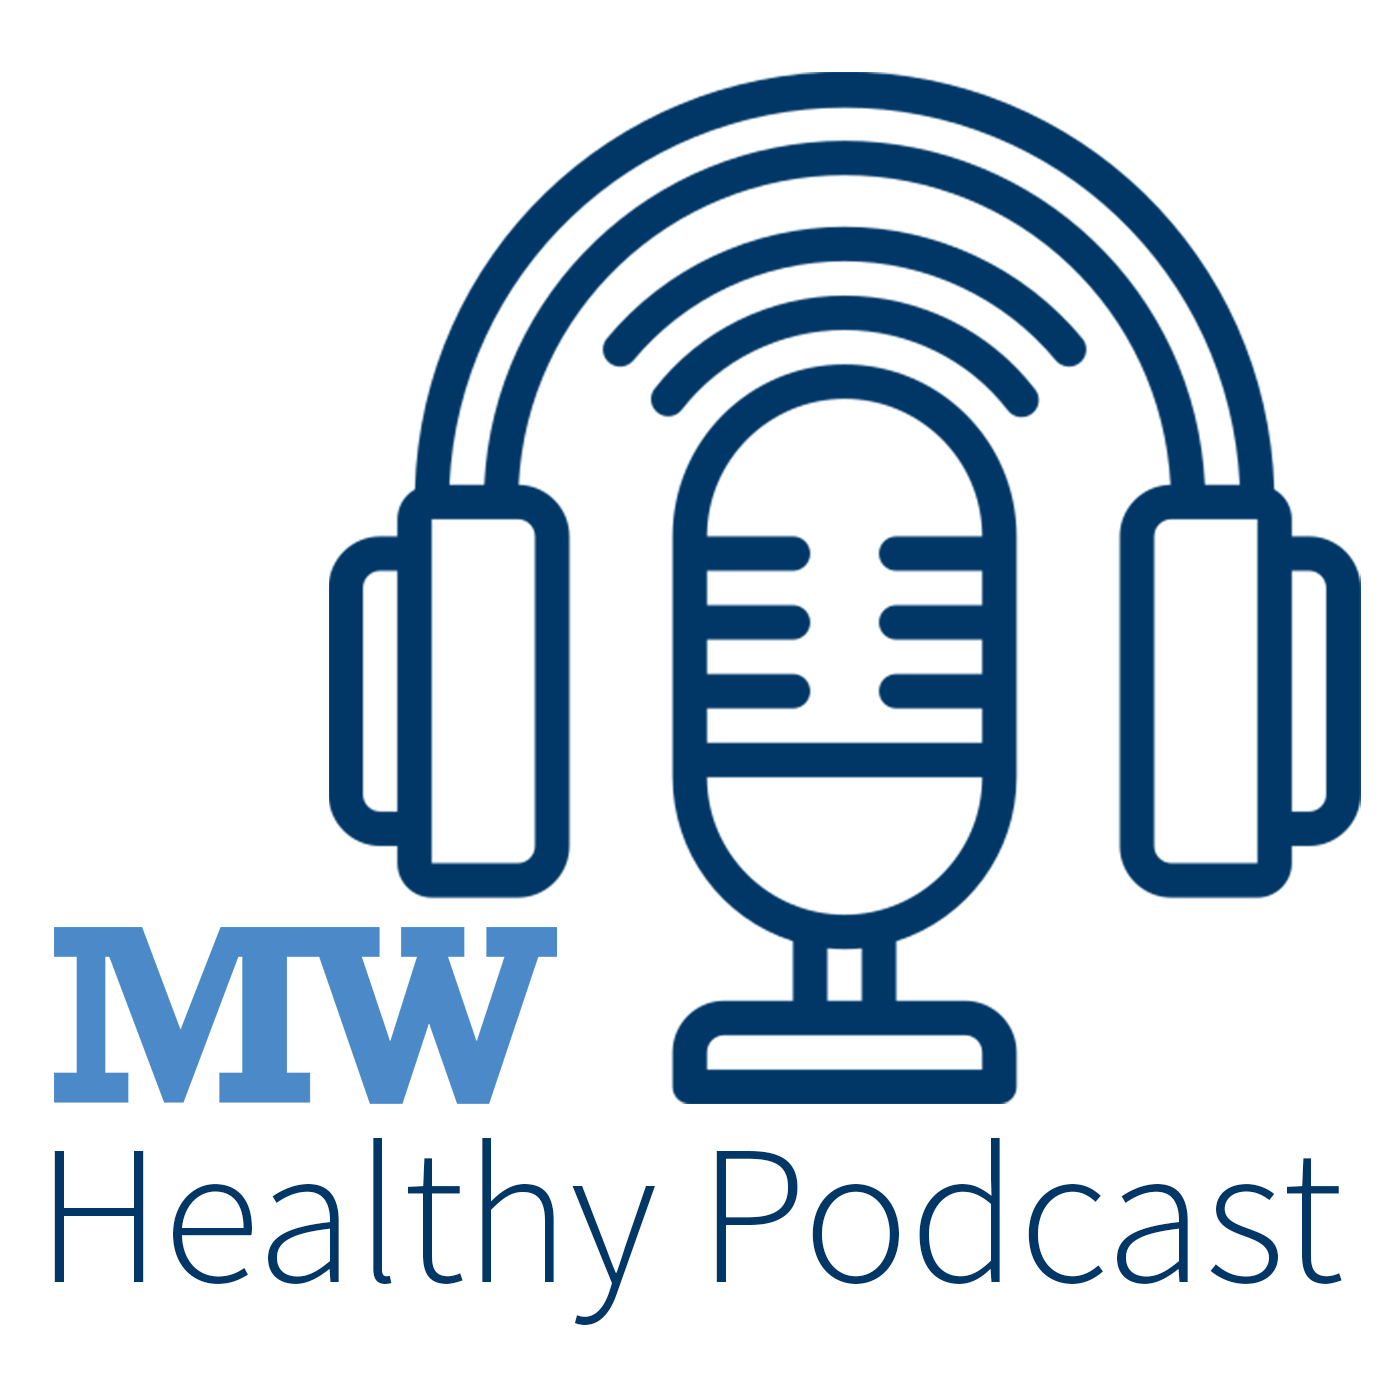 The Healthy Podcast